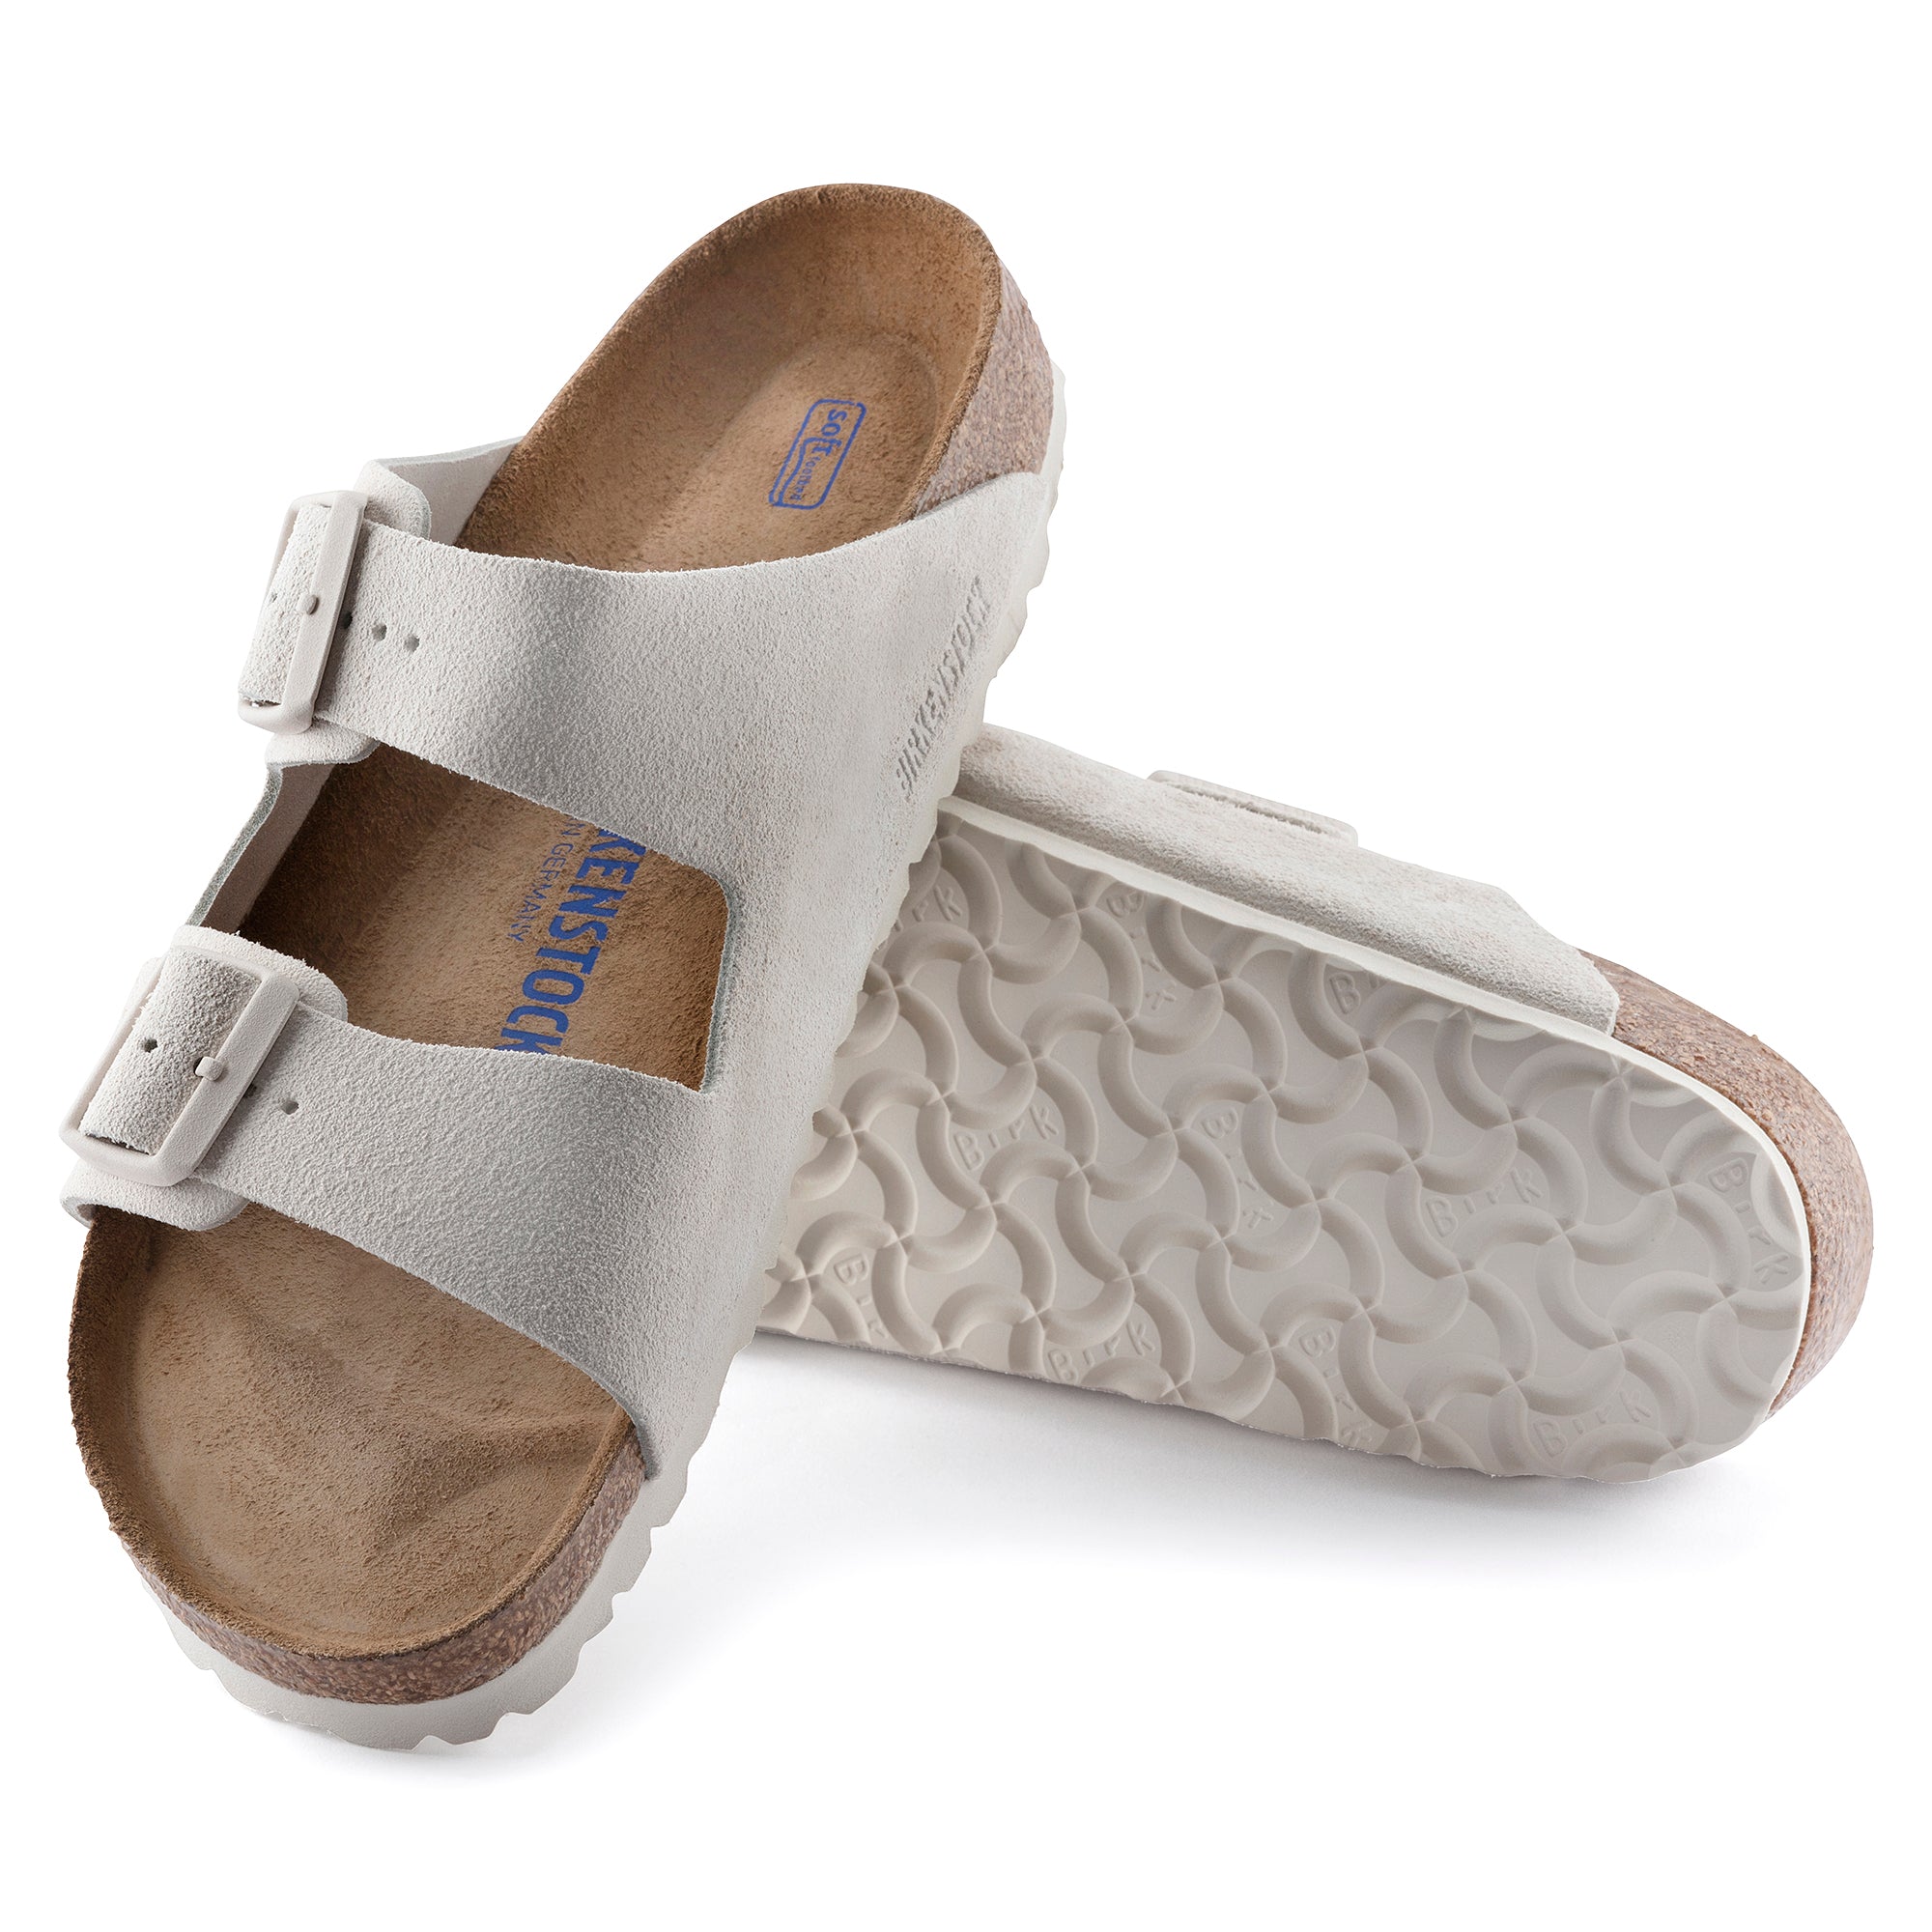 Birkenstock Limited Edition Arizona Soft Footbed antique white suede